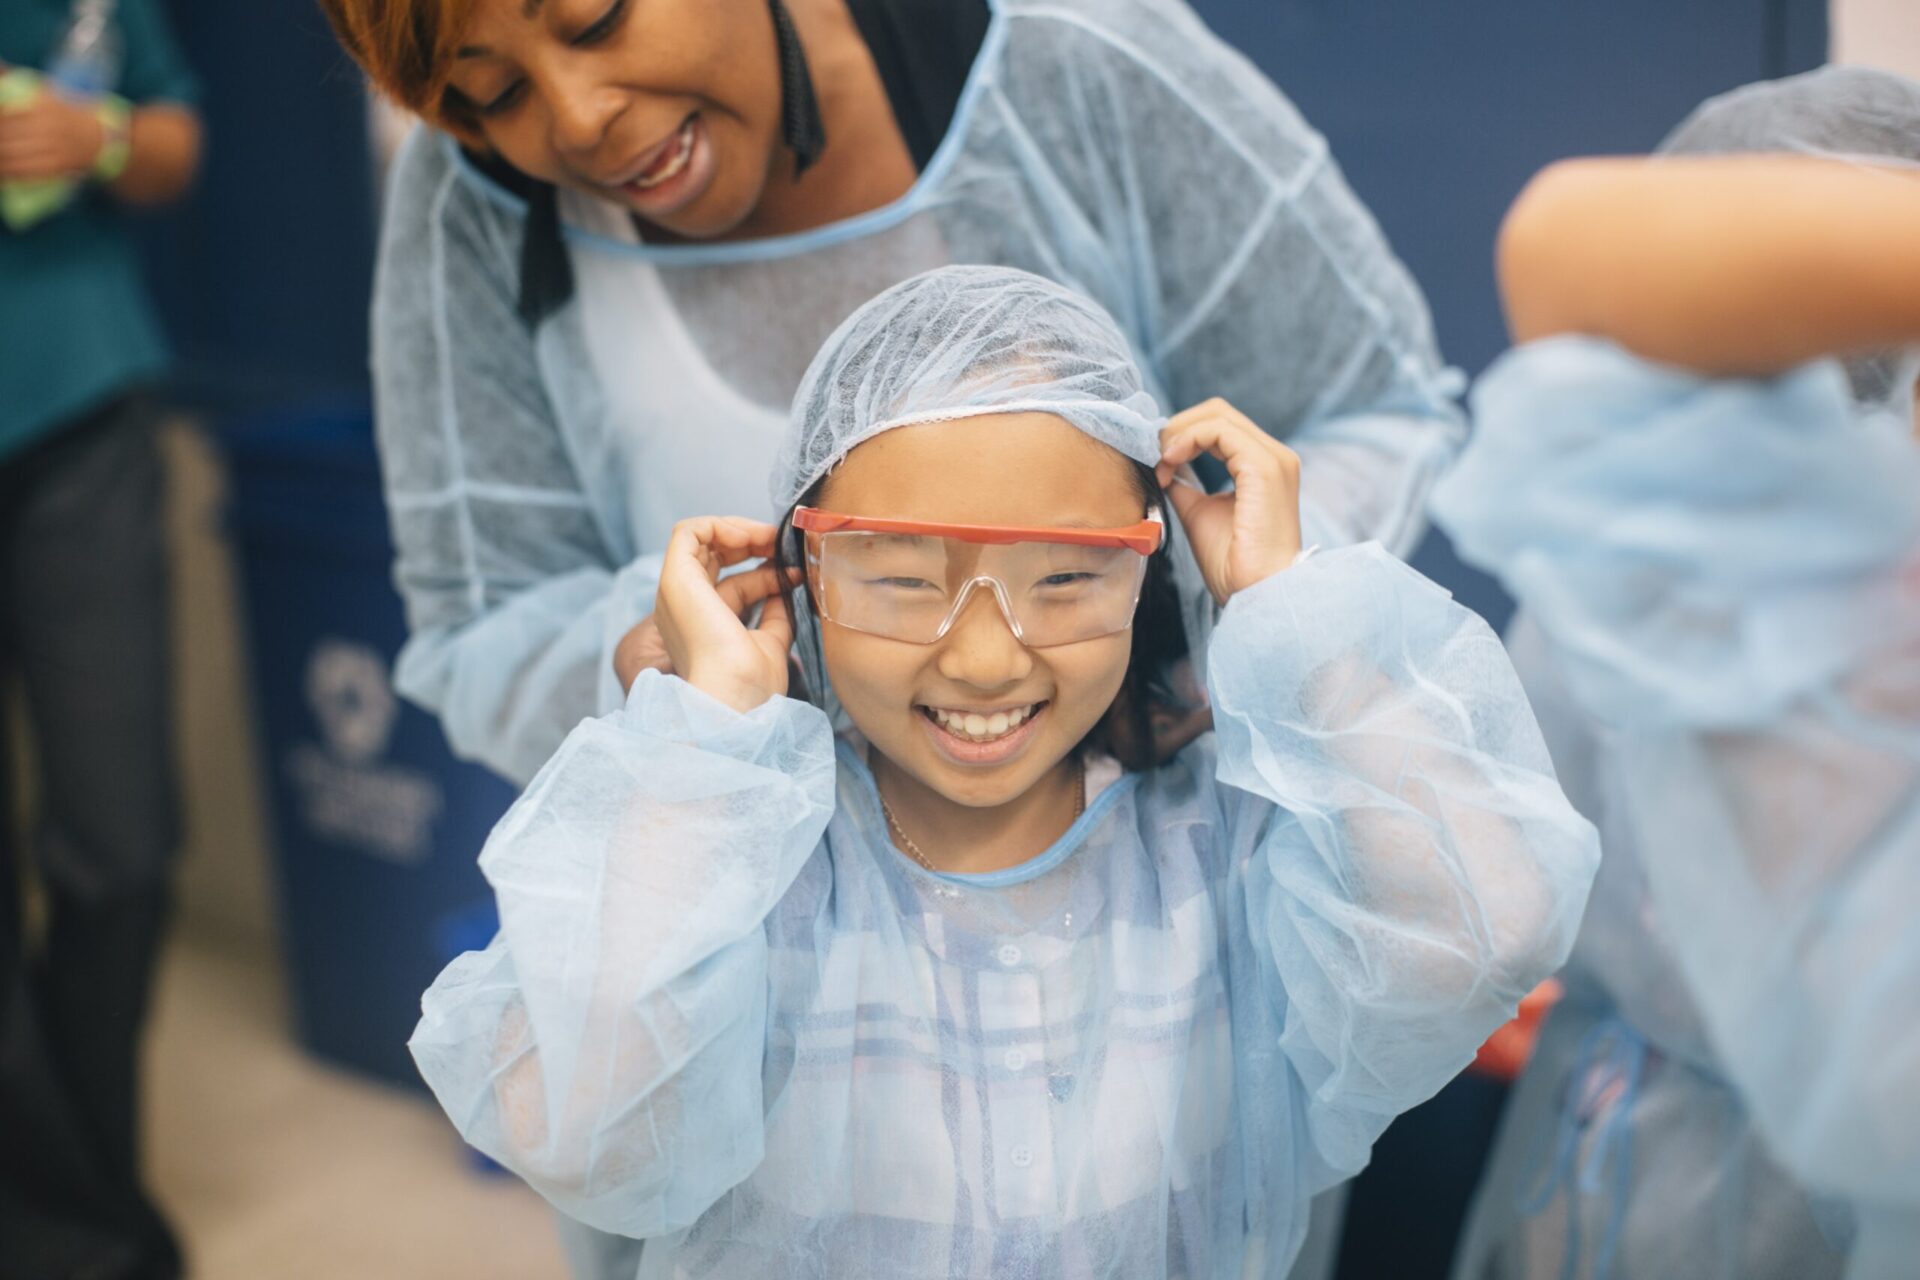 A STEM teacher helps a young student dress in a lab gown during a science lesson.